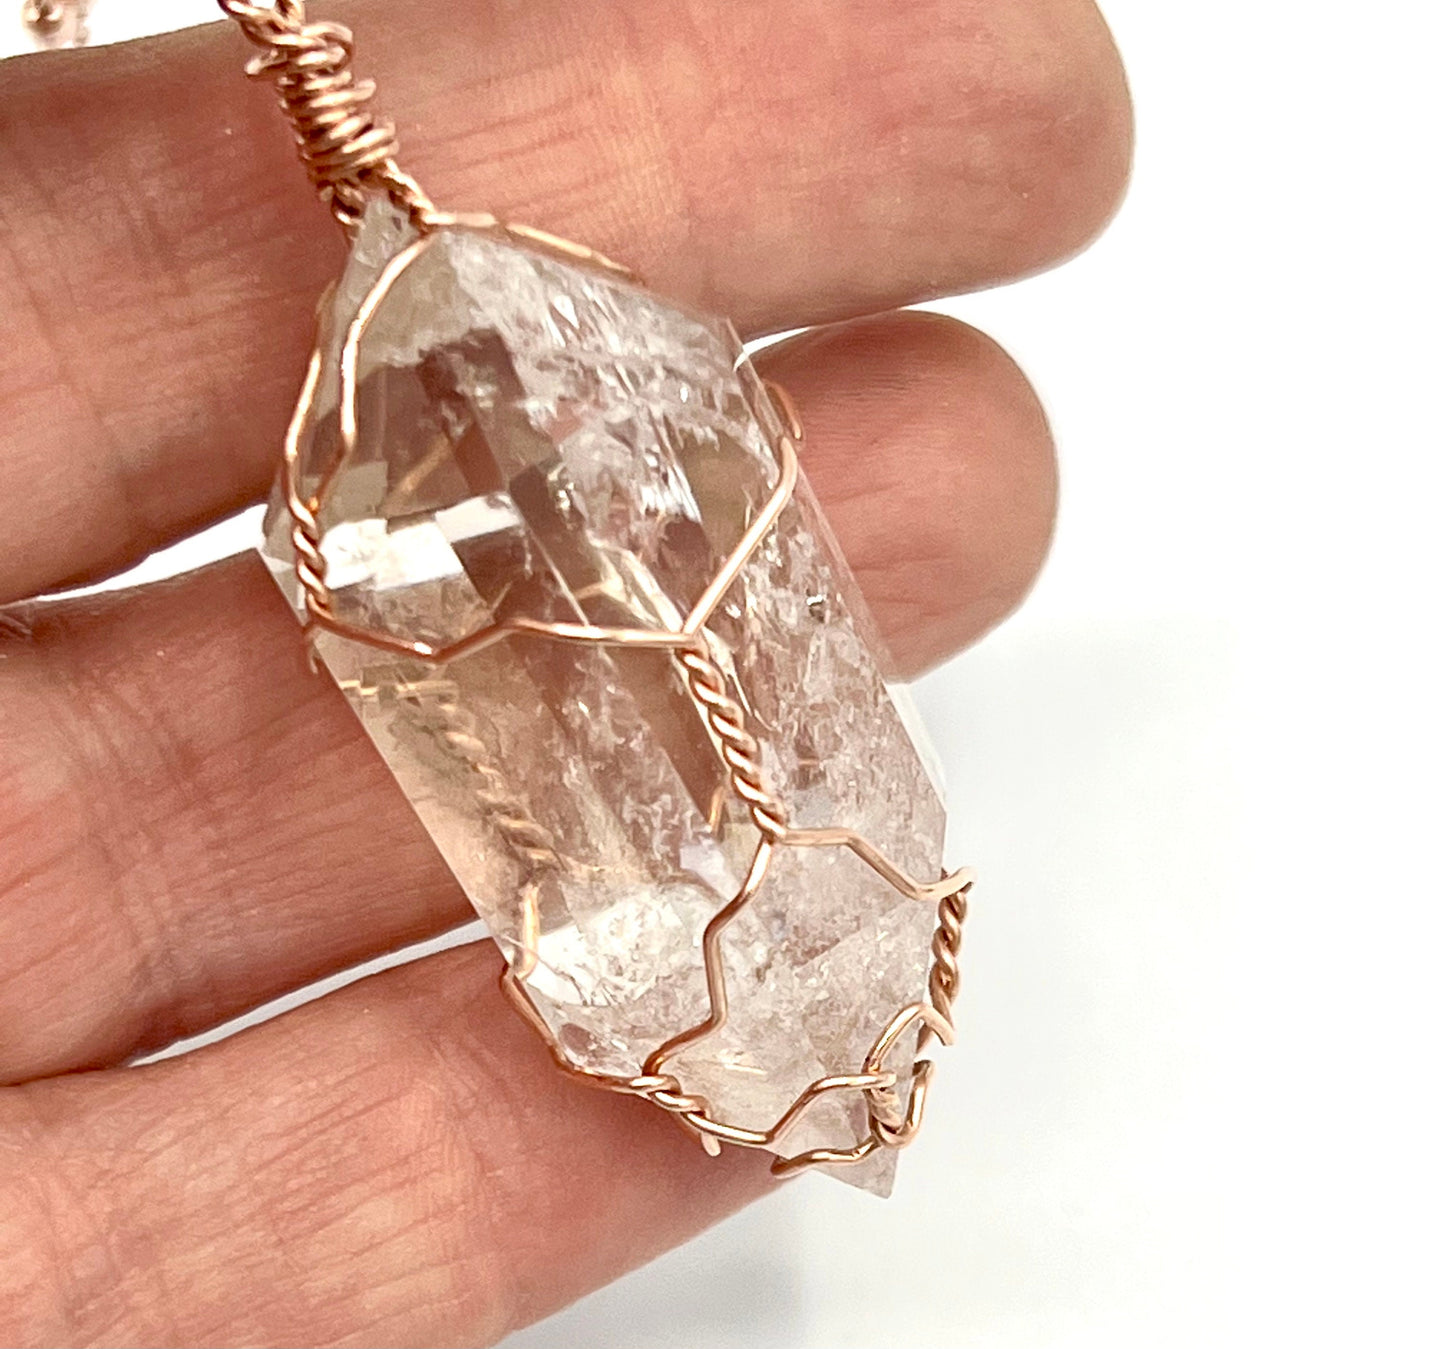 Clear Quartz Crystal Pendant Necklace Point wired Healing stone Gemstone Rose gold silver